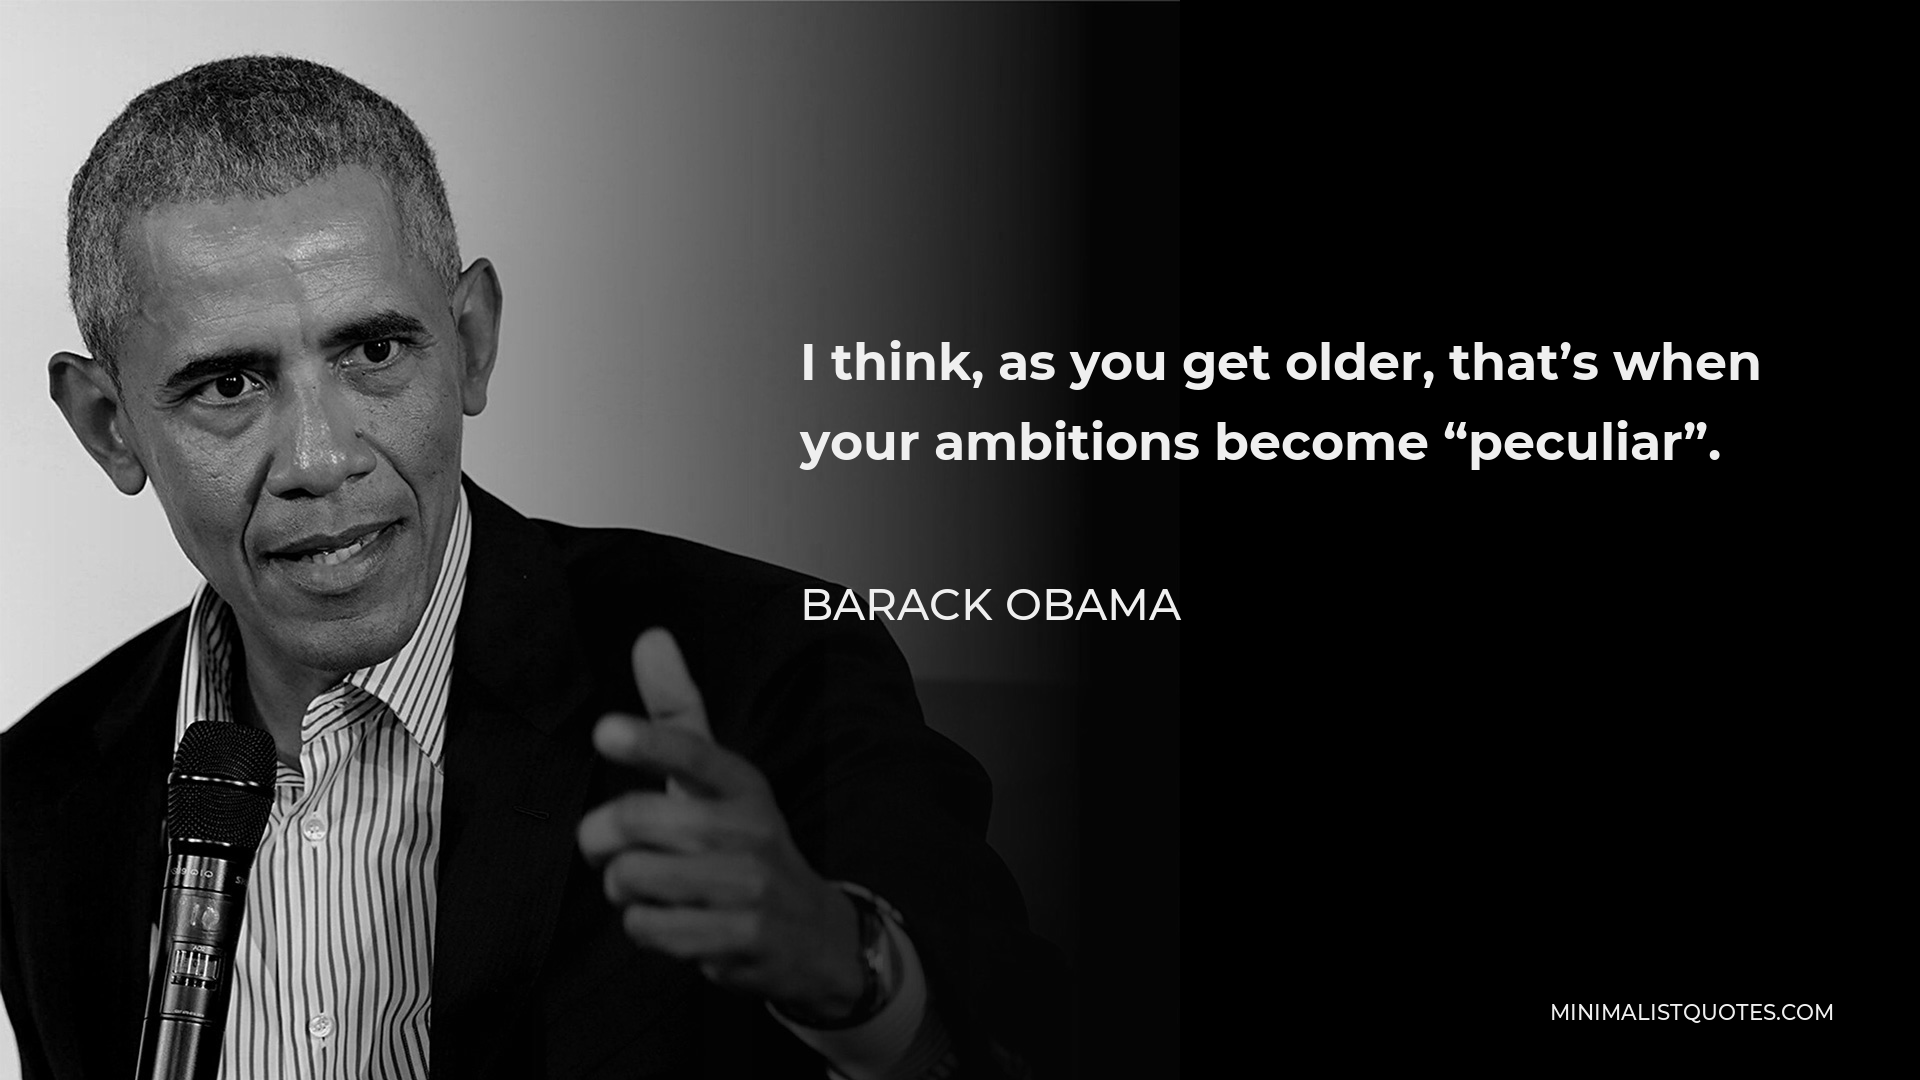 Barack Obama Quote - I think, as you get older, that’s when your ambitions become “peculiar”.